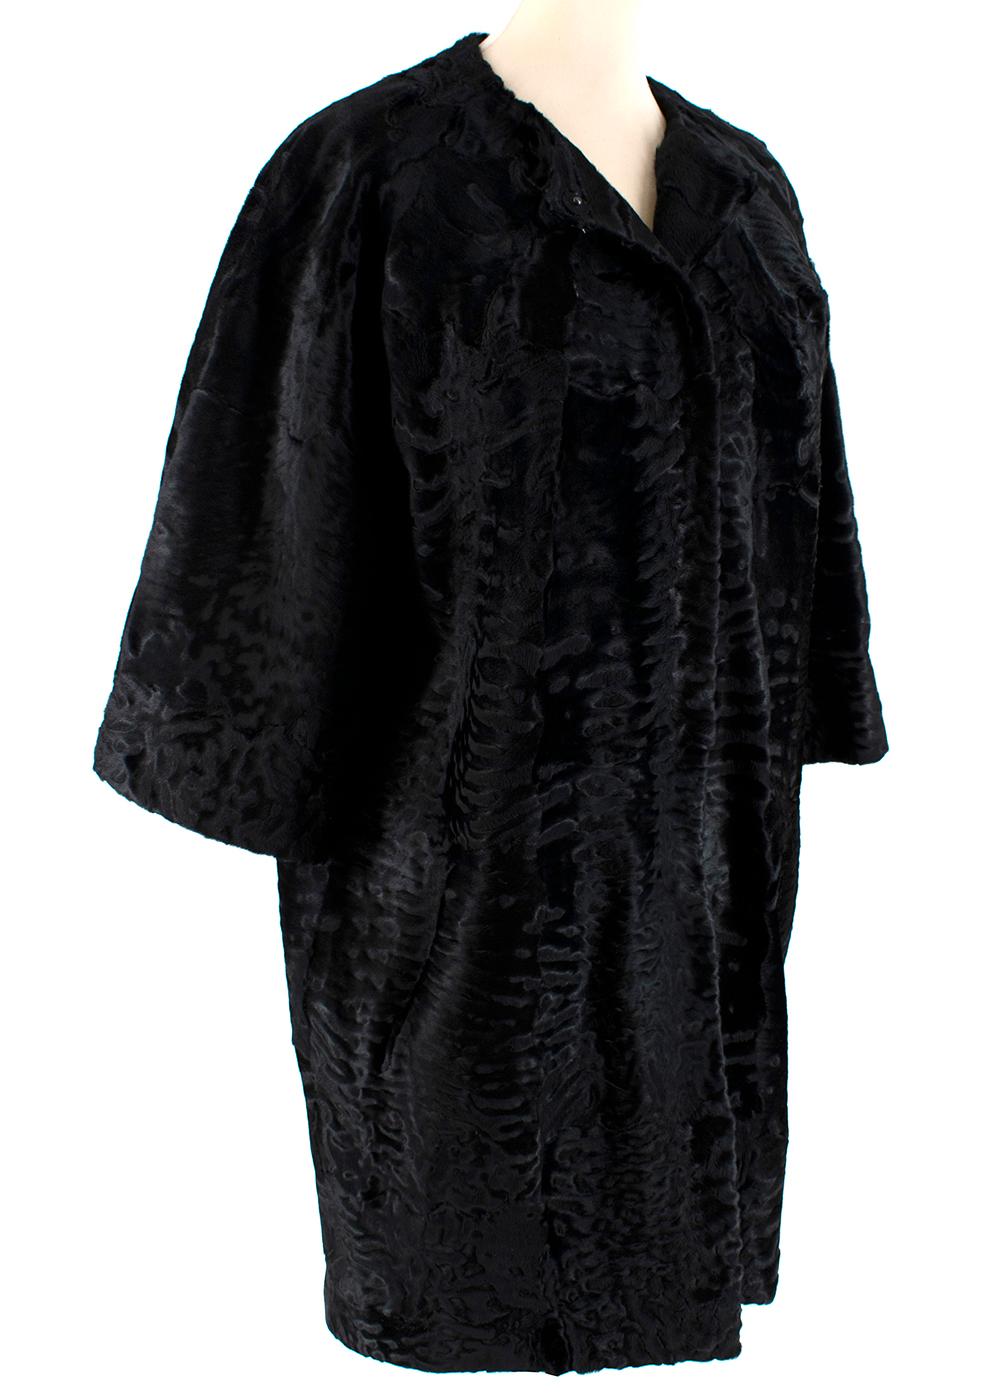 J Mendel Black Astrakhan Fur Collarless Coat

- Made of luxurious lustrous astrakhan 
- Soft beautiful texture 
- Classic cut 
- 3/4 Sleeves 
- Collarless 
- Pockets to the front 
- Snap fastening to the front 
- Luxurious silk lining 
- Neutral